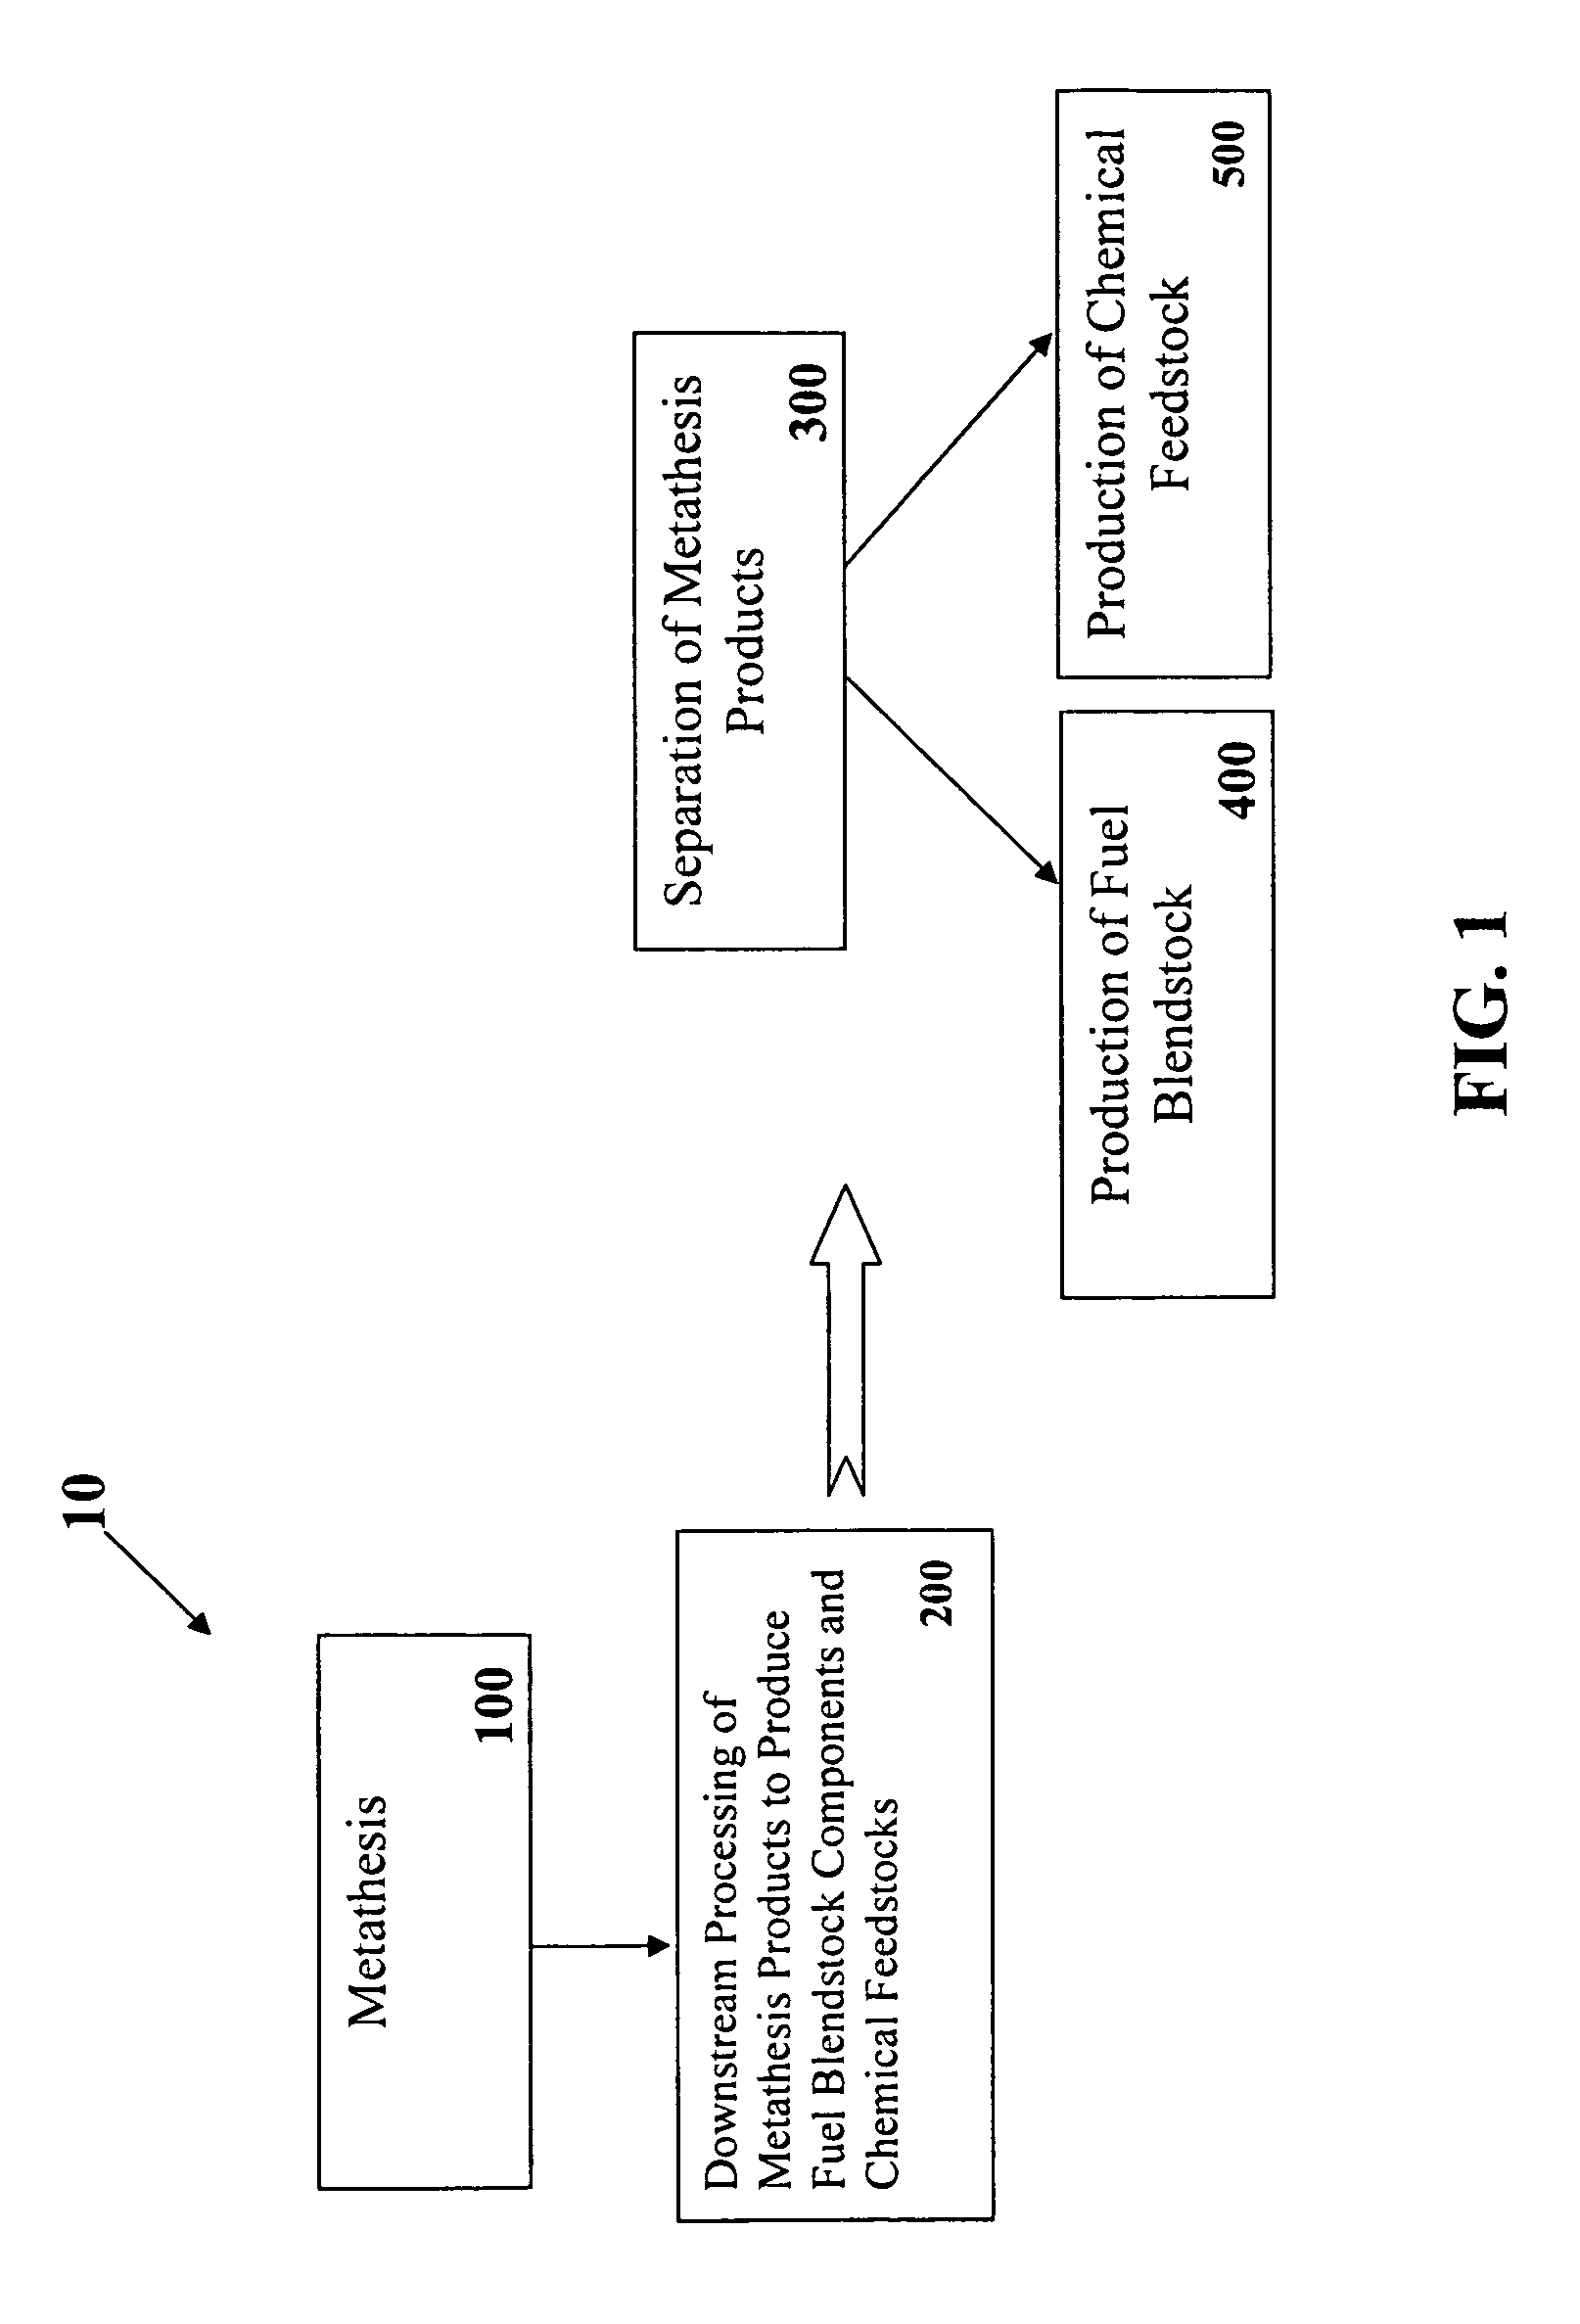 Chain-selective synthesis of fuel components and chemical feedstocks